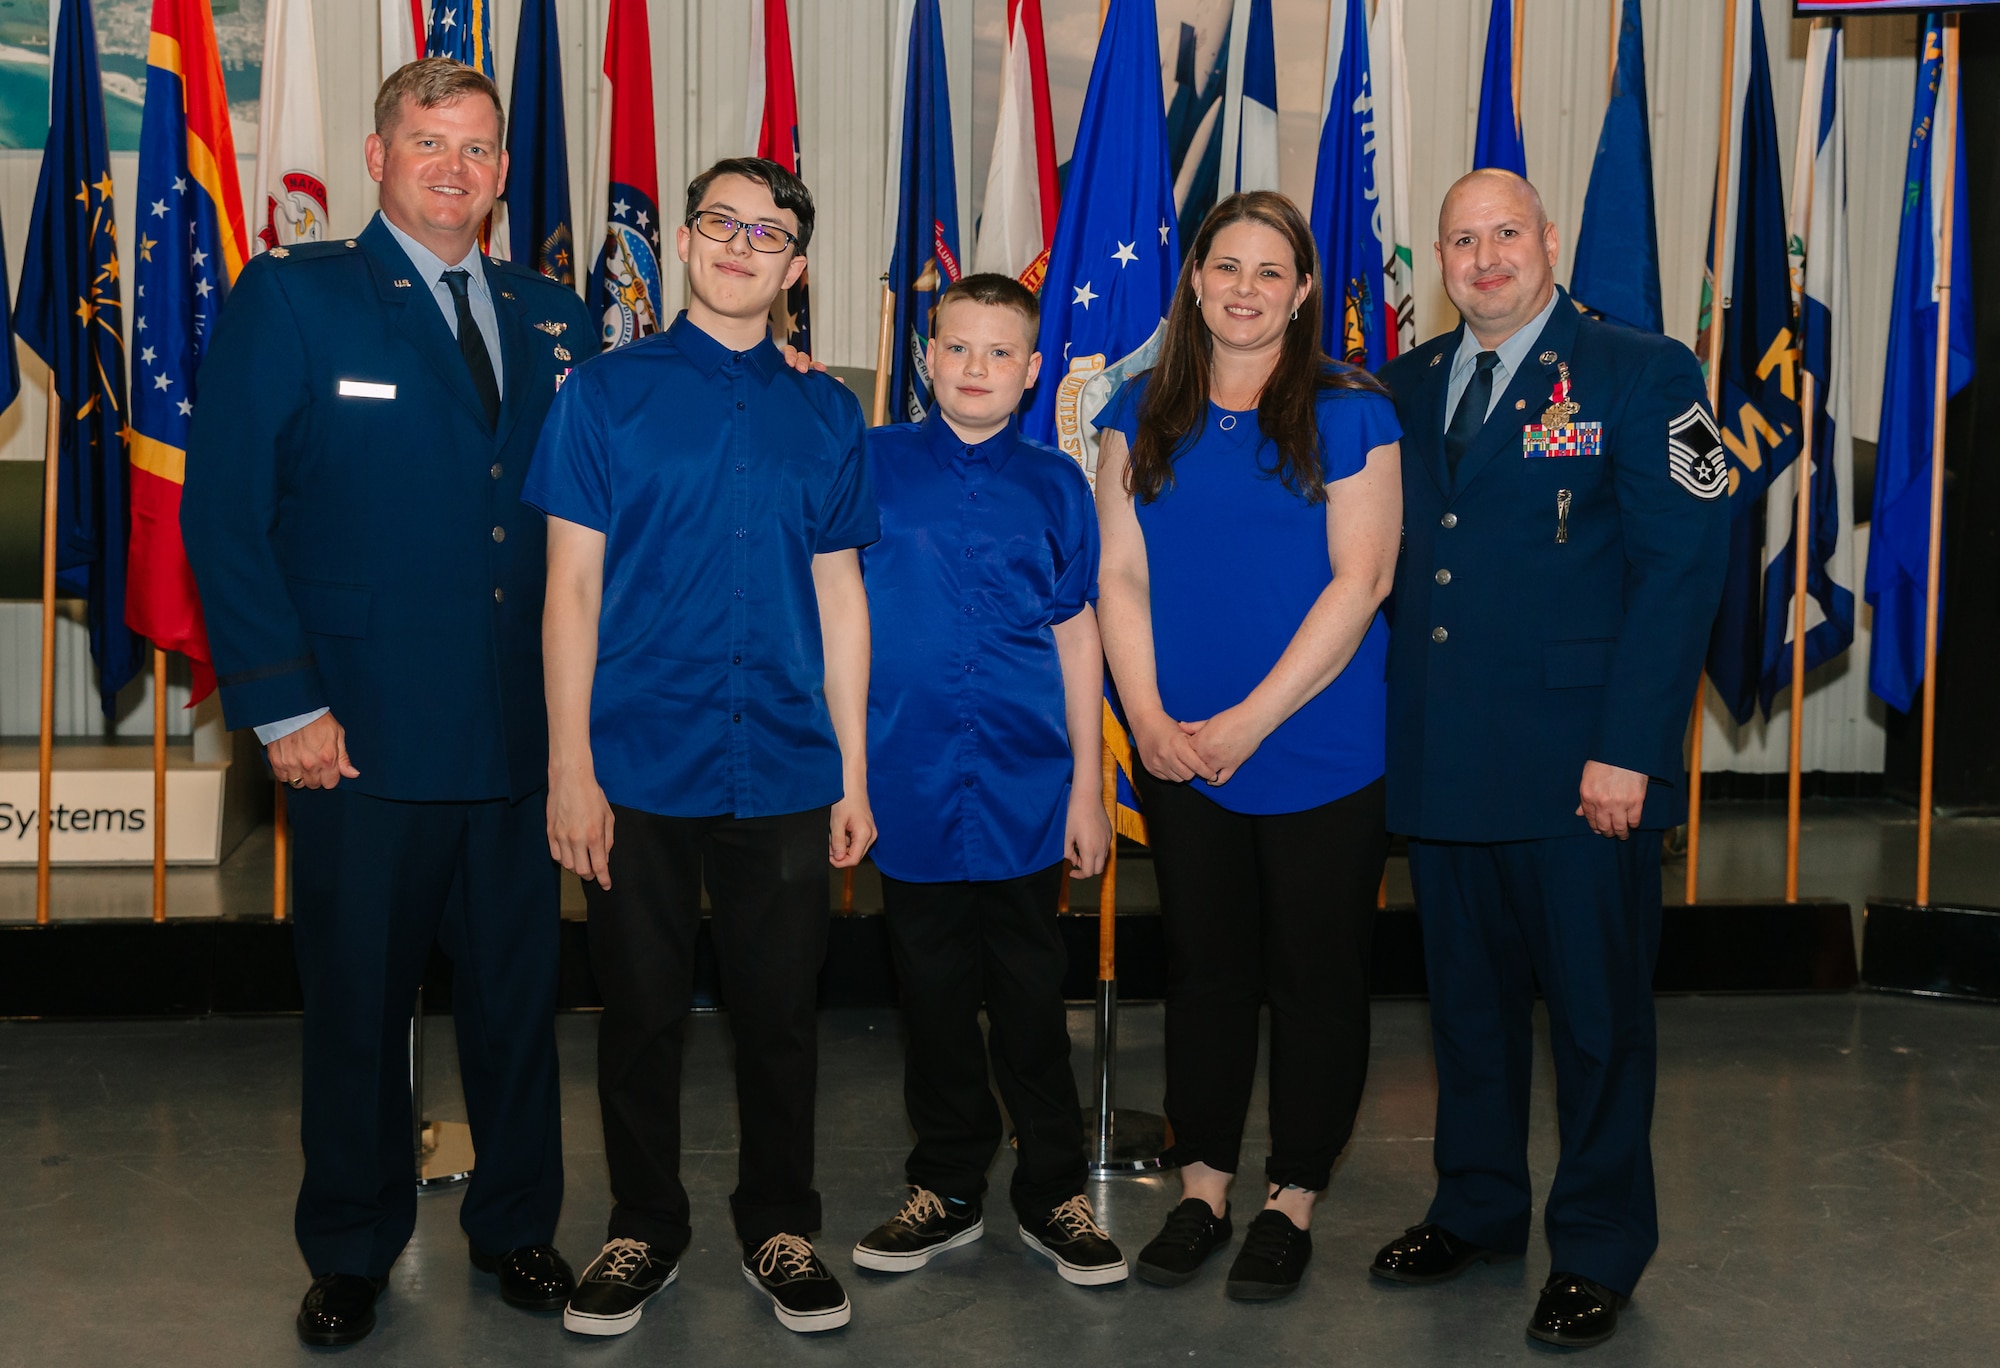 U.S. Air Force SMSgt Joshua Lee Fountain, a former 33rd Aircraft Maintenance Squadron weapons section chief, celebrates his career coming full circle thanks to the recruiter who helped him join twenty-one years ago.